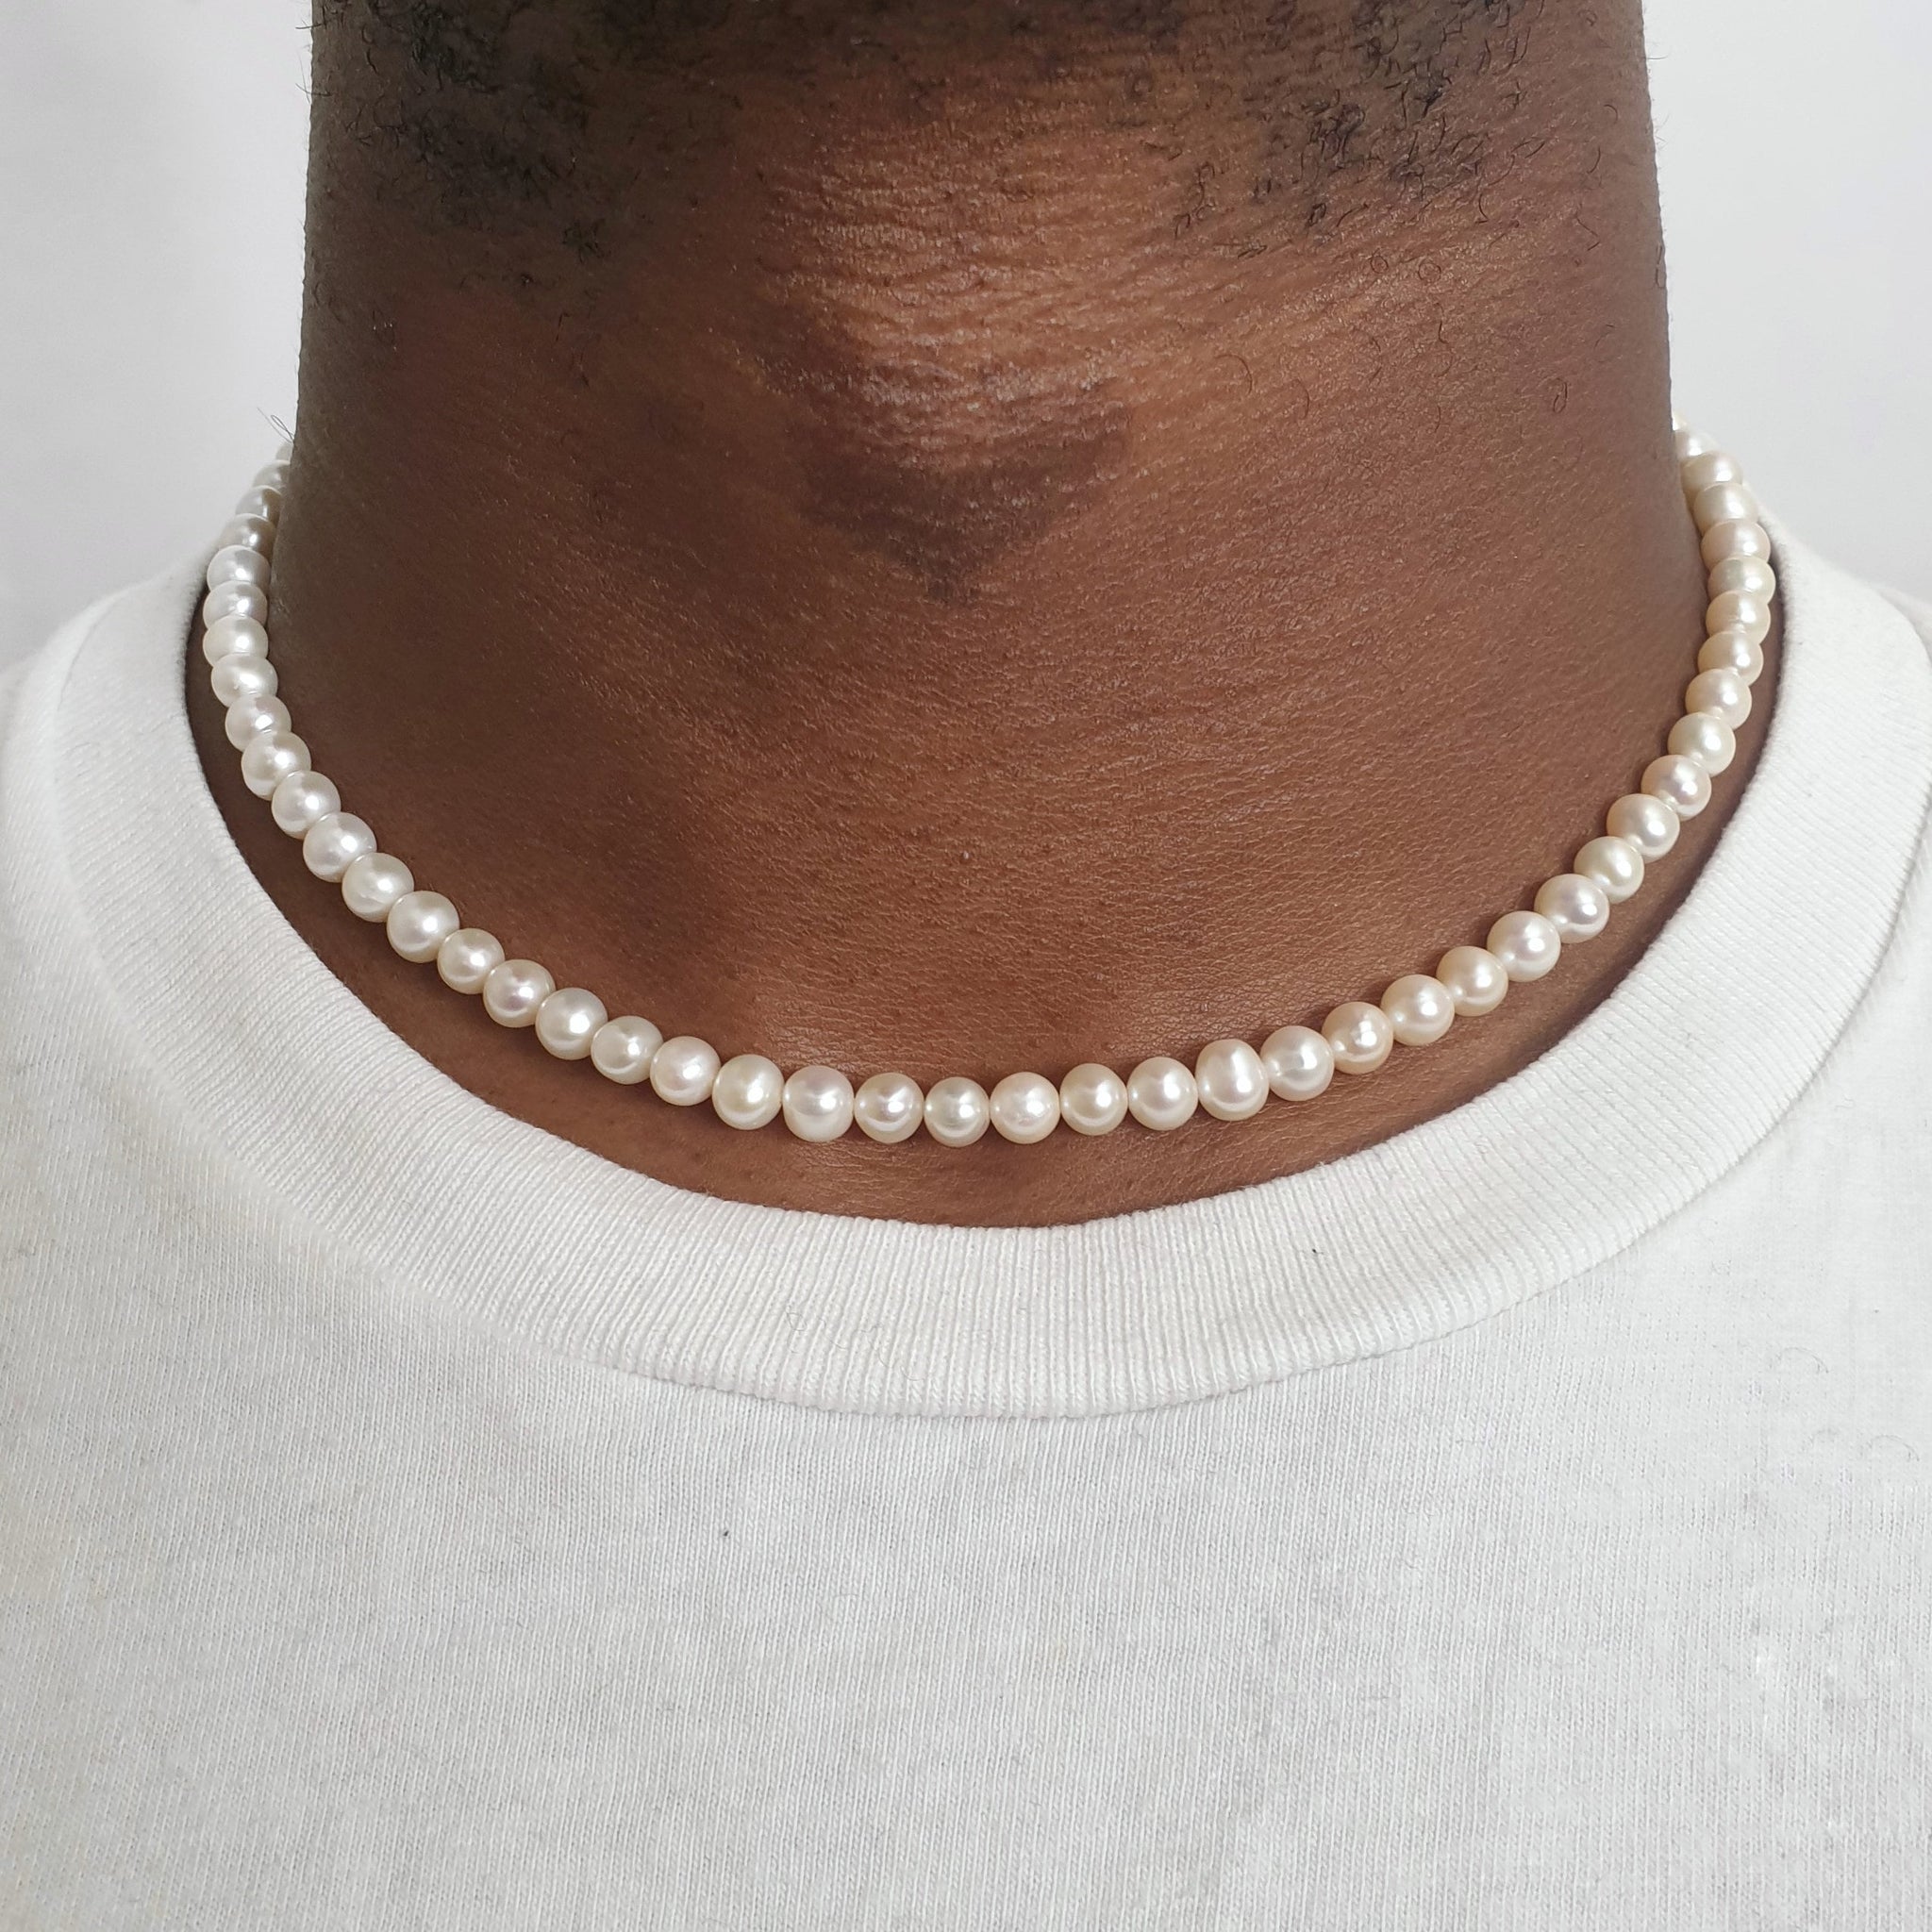 KXIEER Pearl Necklace for Men,Pearl Necklaces for Women,6mm India | Ubuy